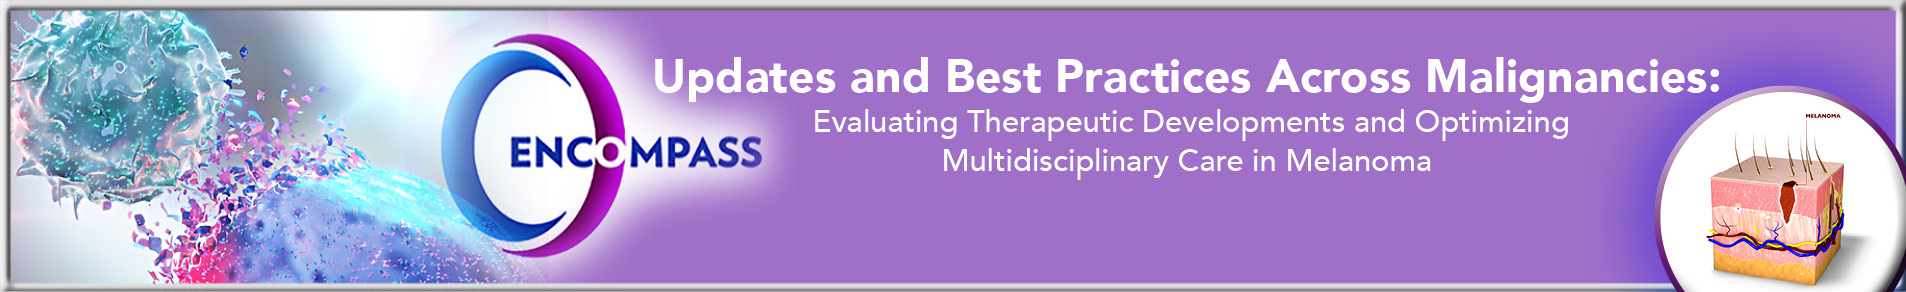 Updates and Best Practices Across Malignancies: Evaluating Therapeutic ...